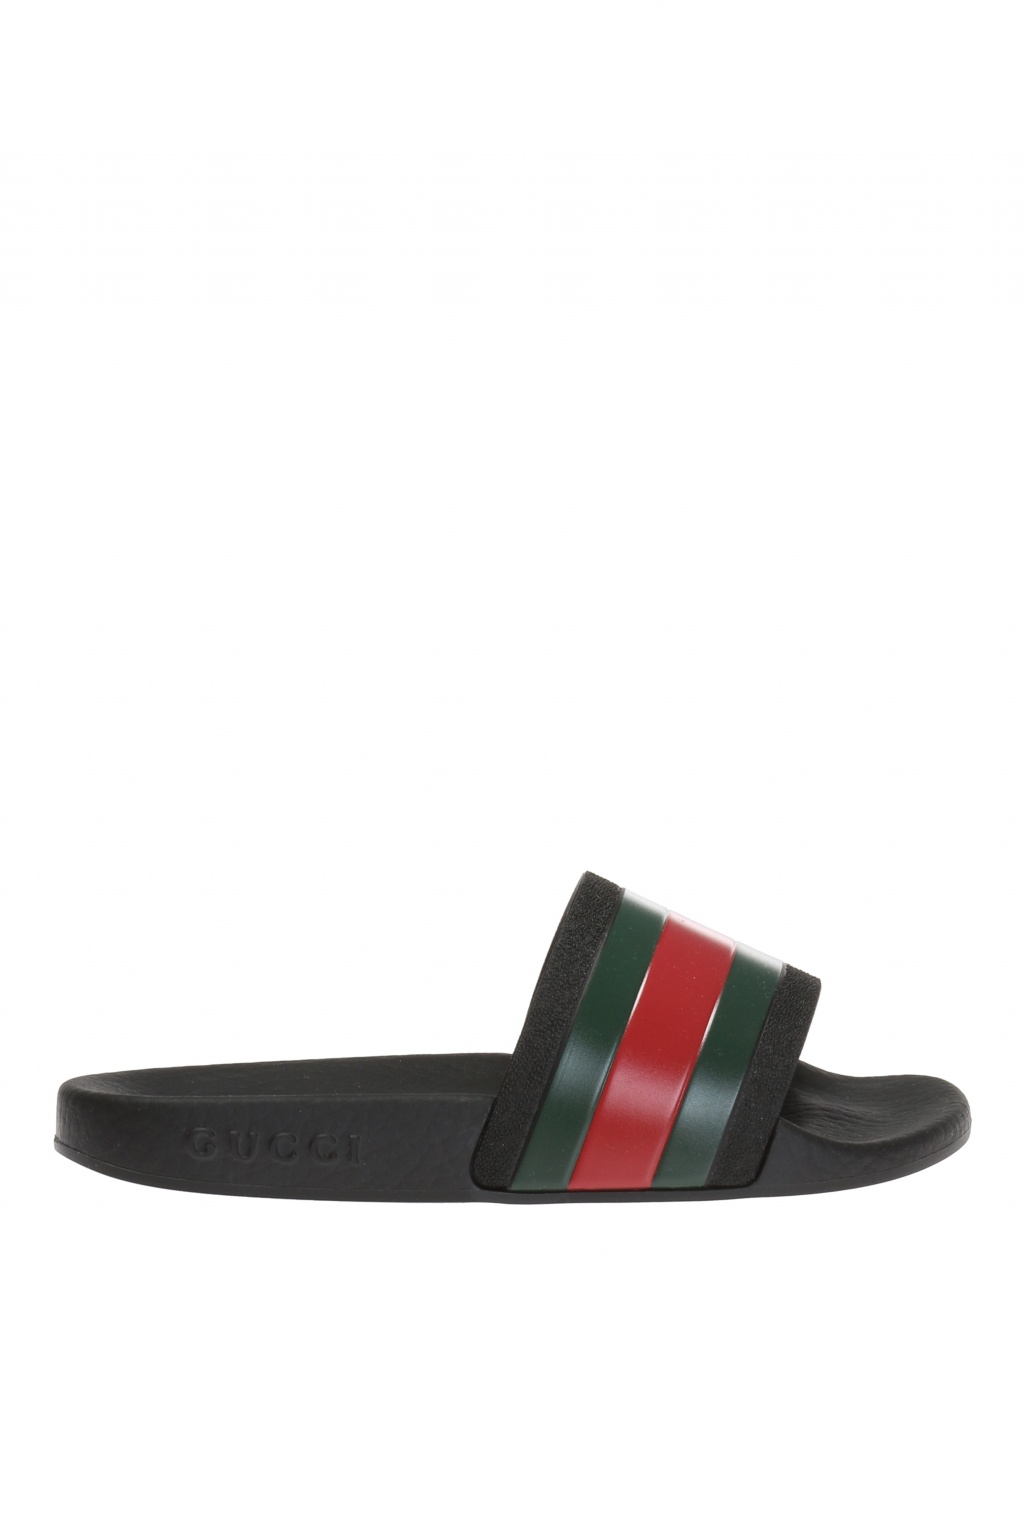 red gucci sliders